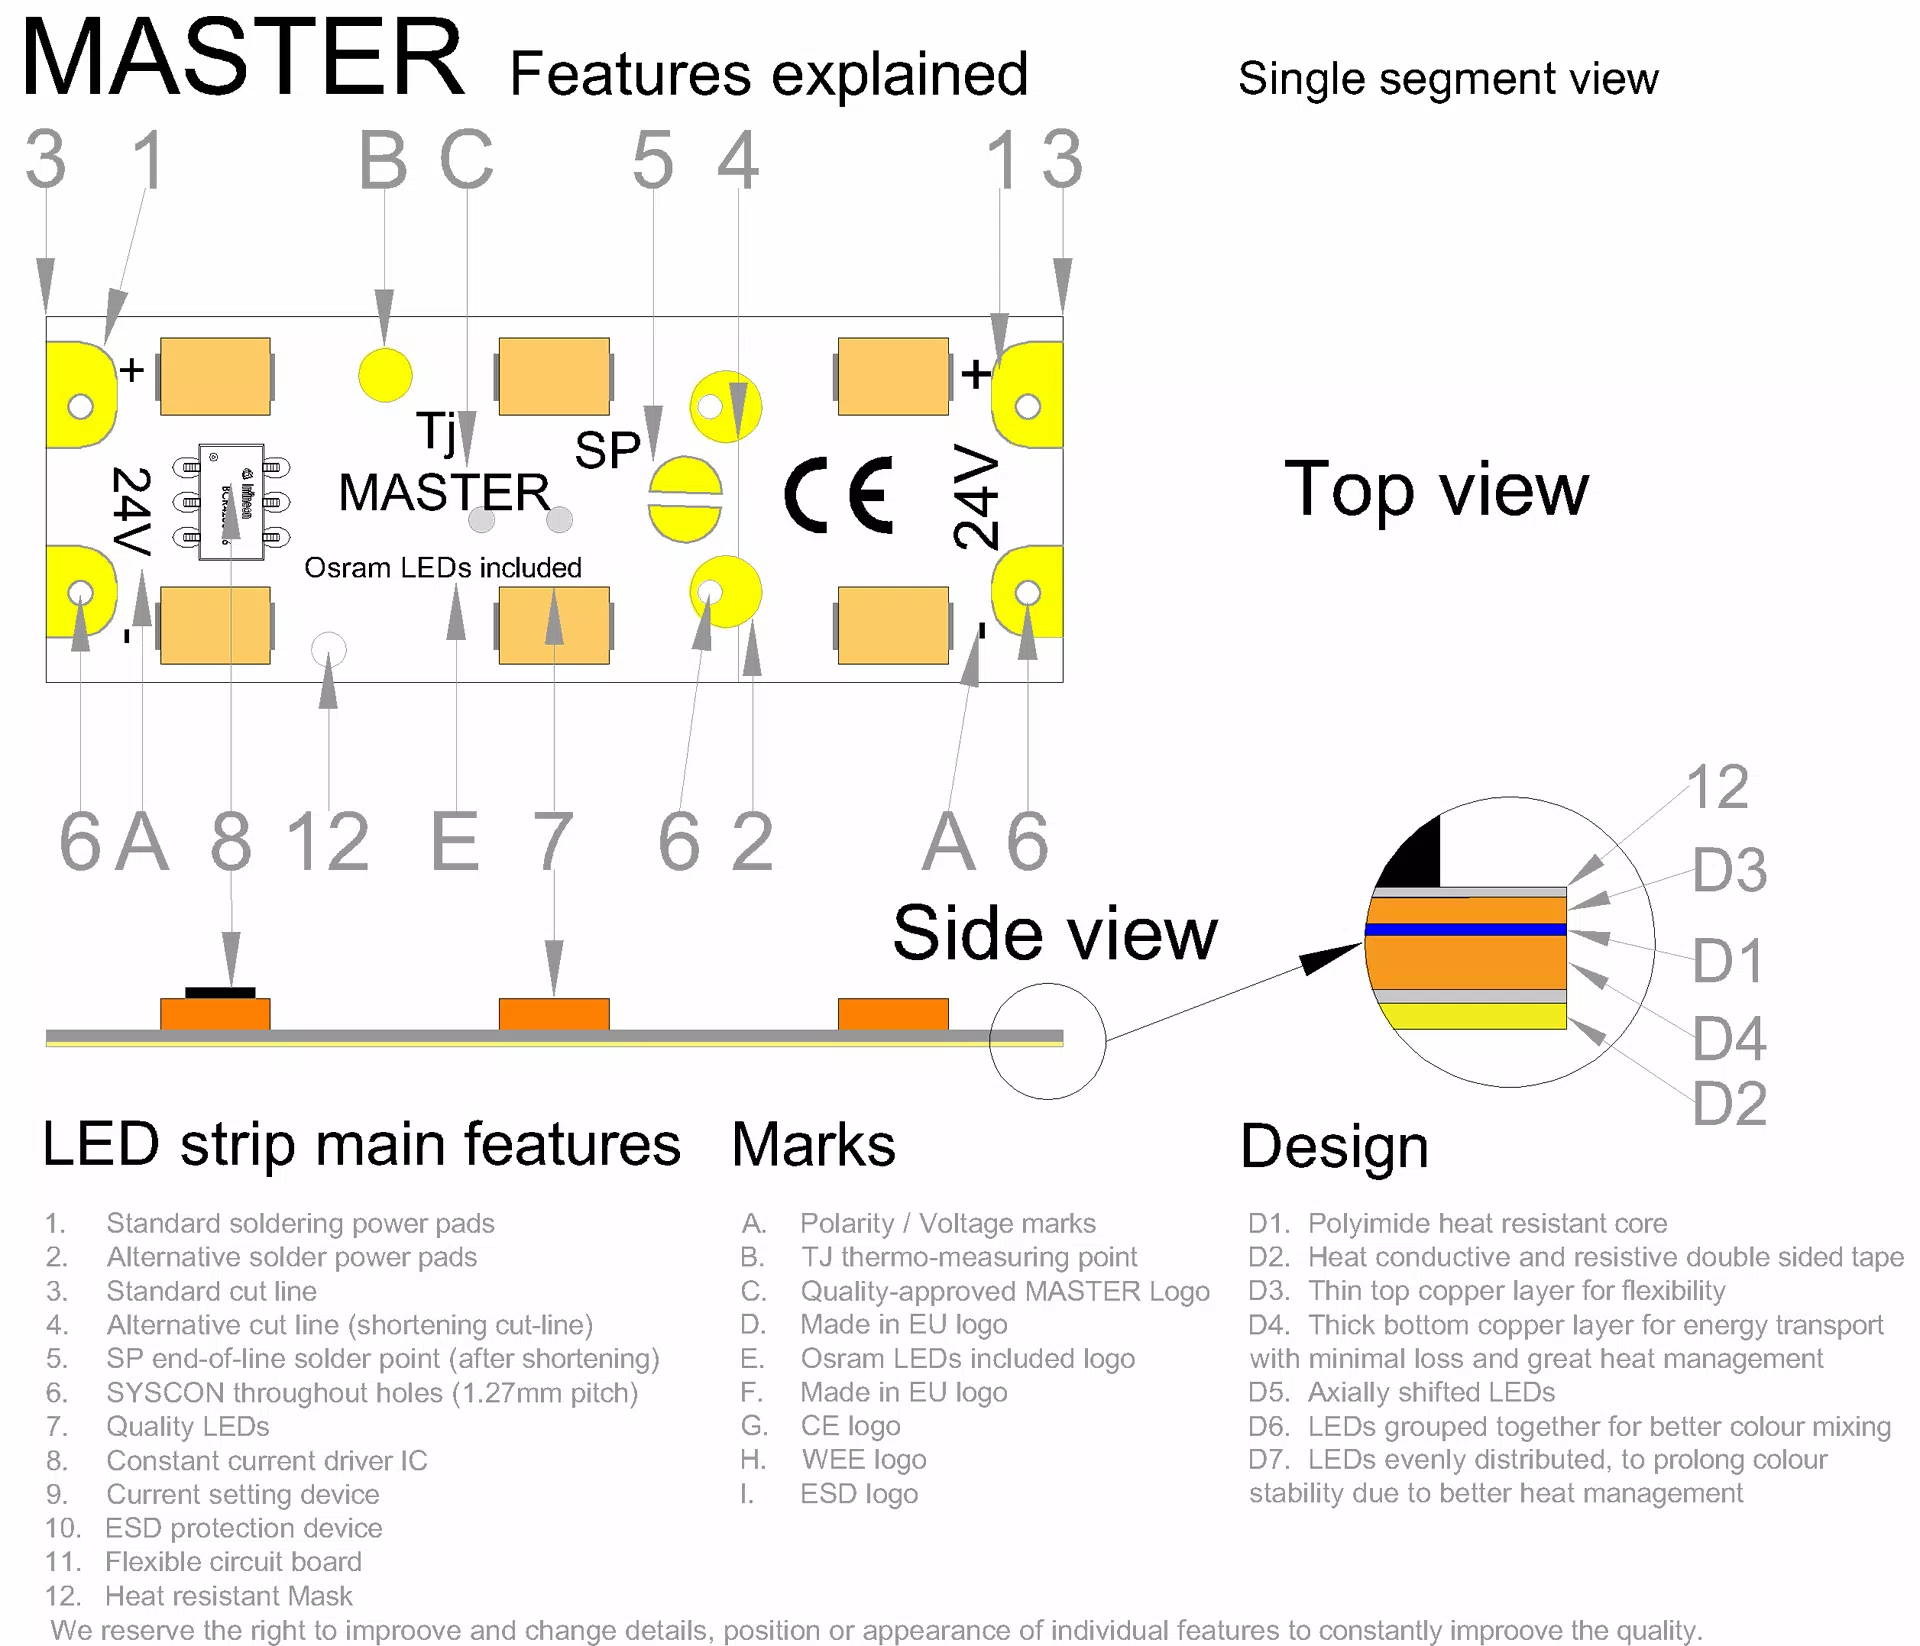 MASTER HD-DECO LED strip segment drawing with all features explained